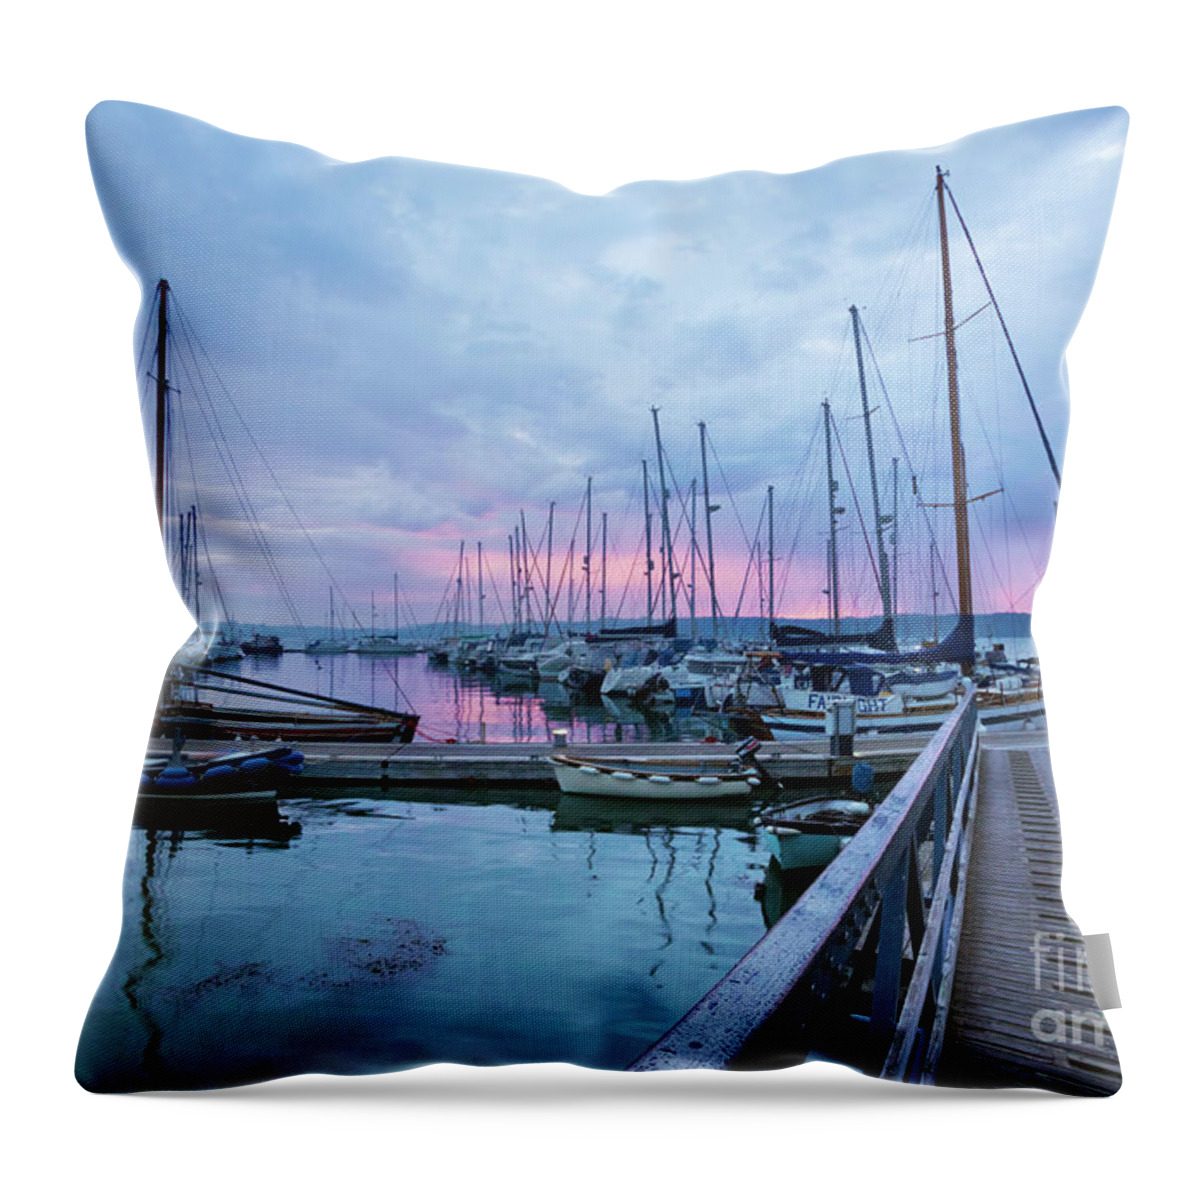 Mylor Throw Pillow featuring the photograph Mylor Marina Sunrise by Terri Waters